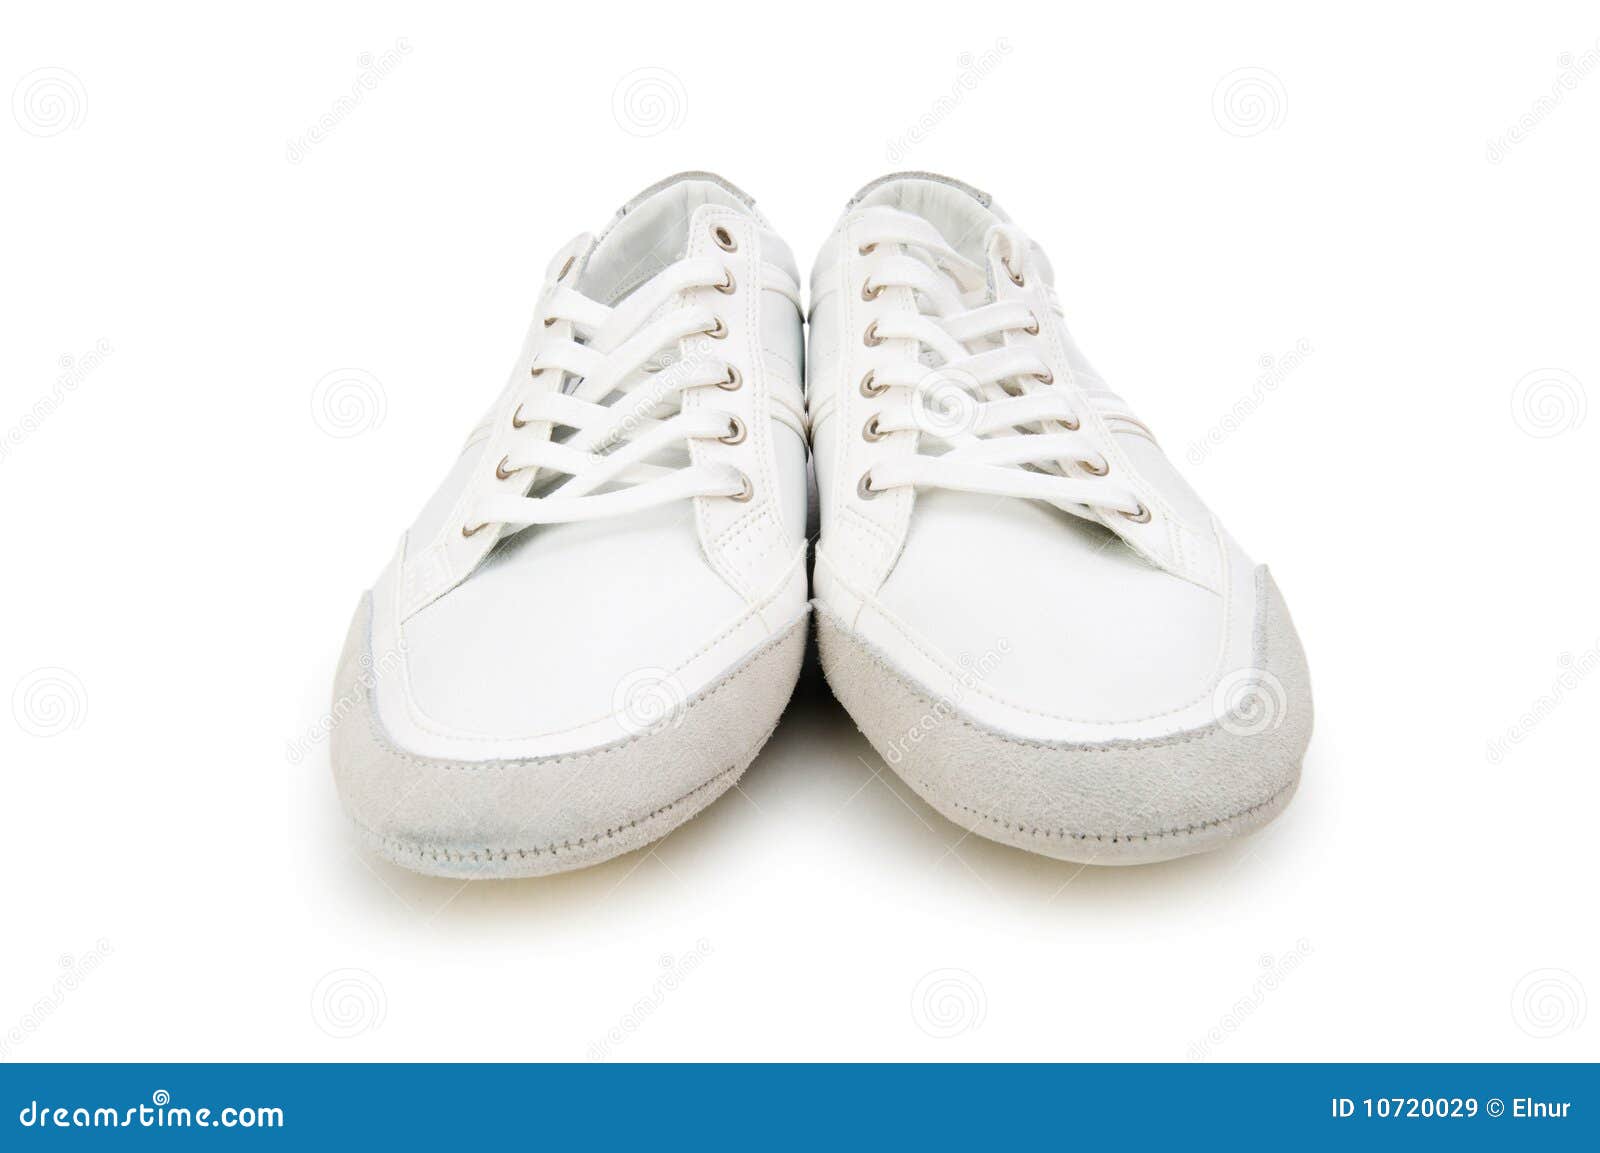 Short shoes isolated stock image. Image of shoe, soccer - 10720029